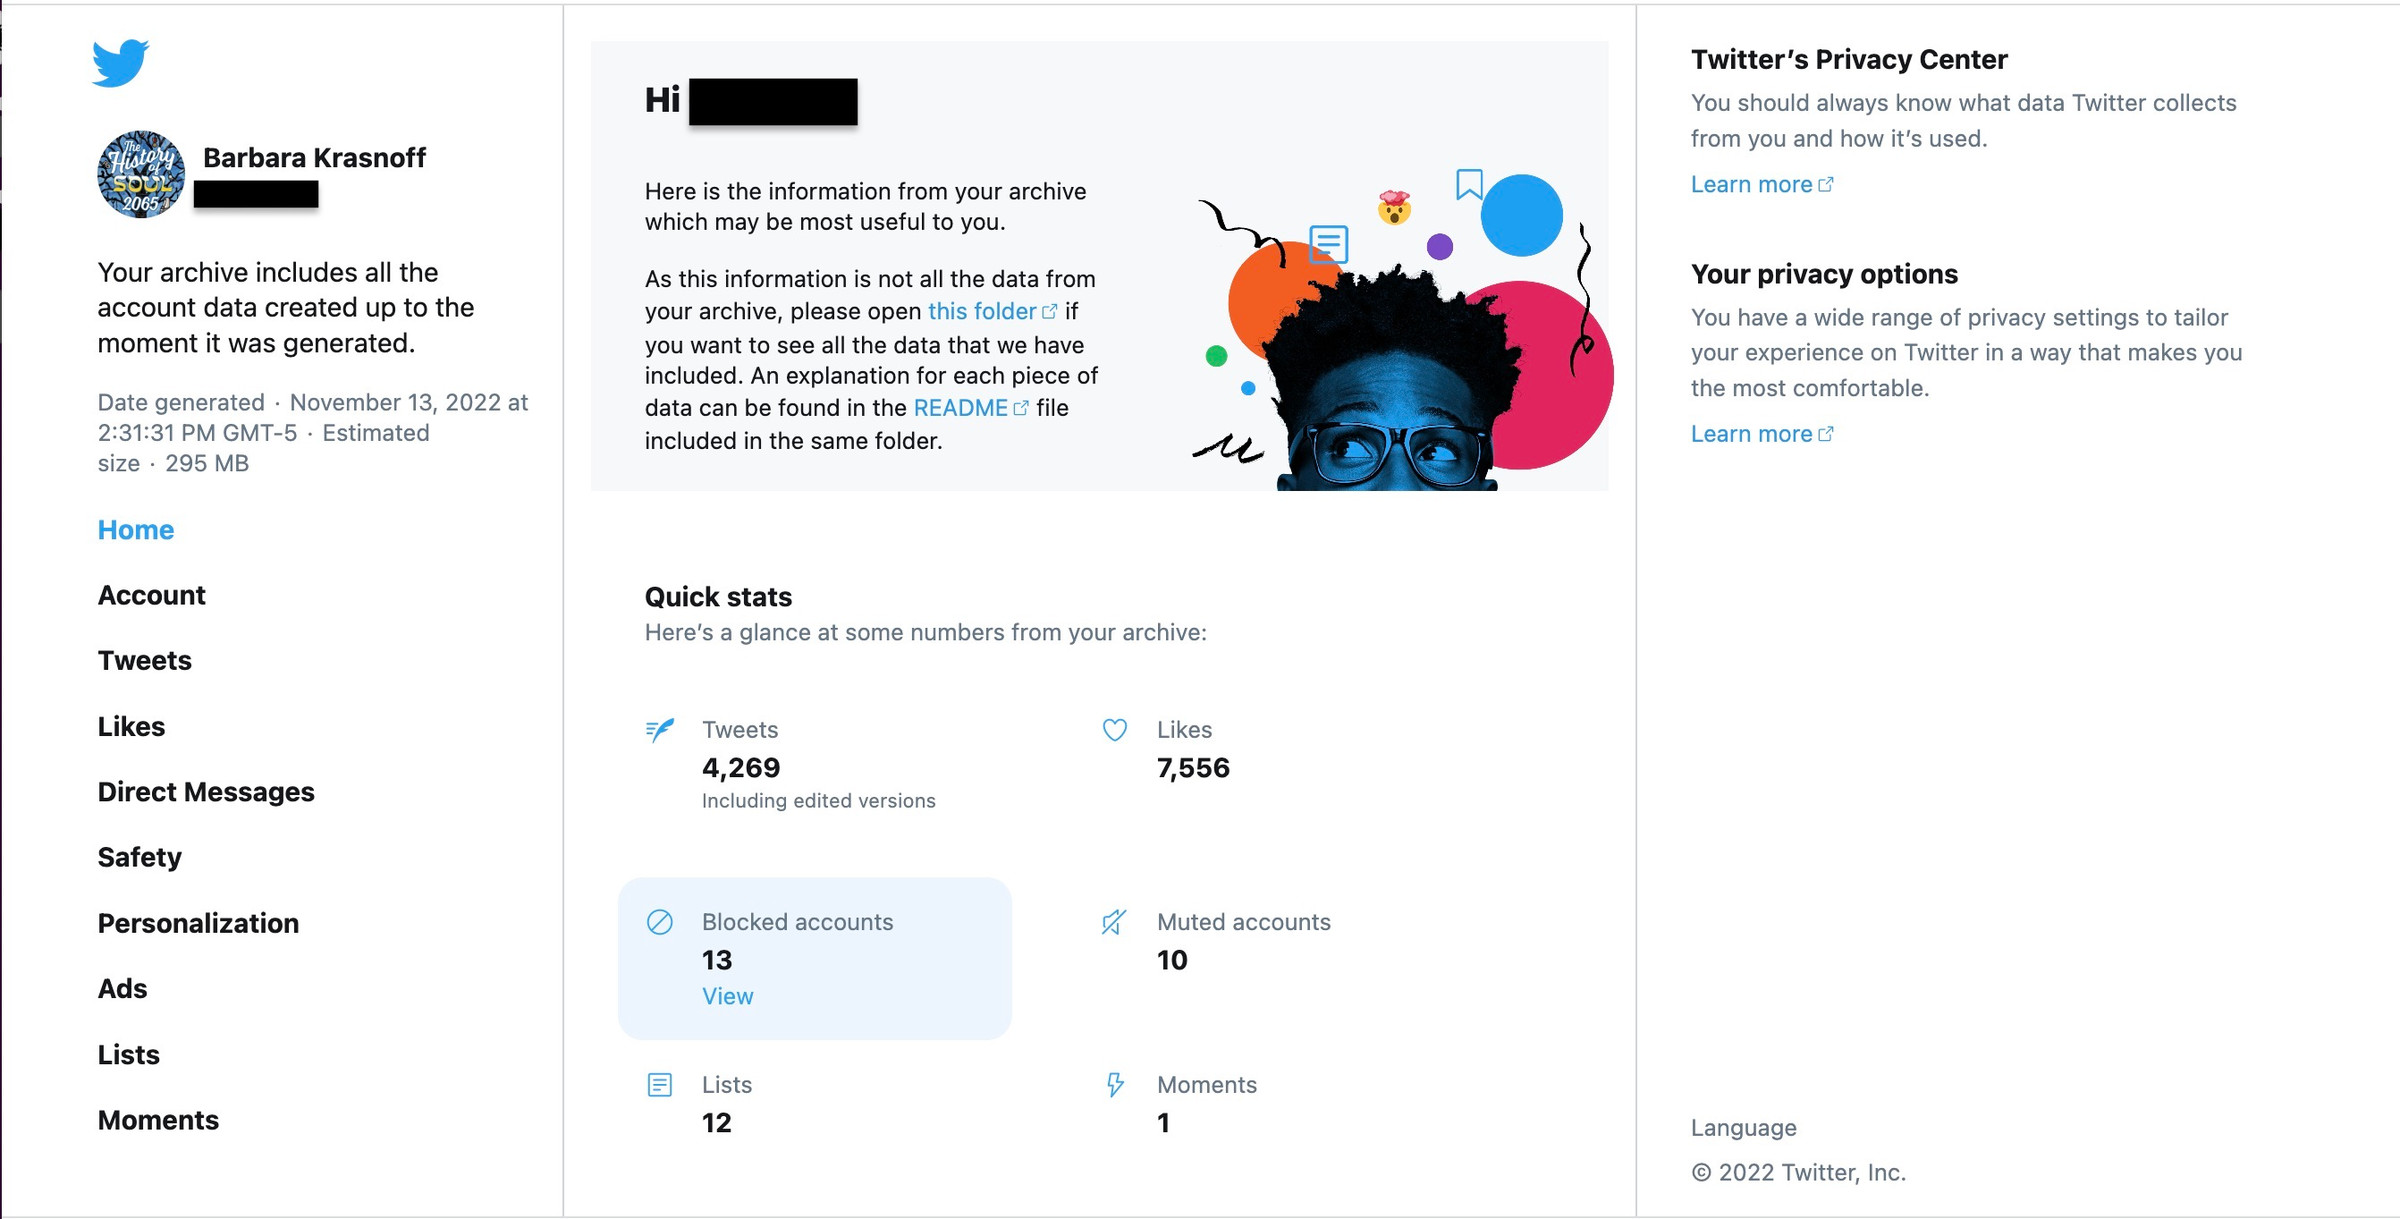 A web page showing various stats for the downloaded Twitter files in the center, a list of file types on the left, and notes about privacy on the right.